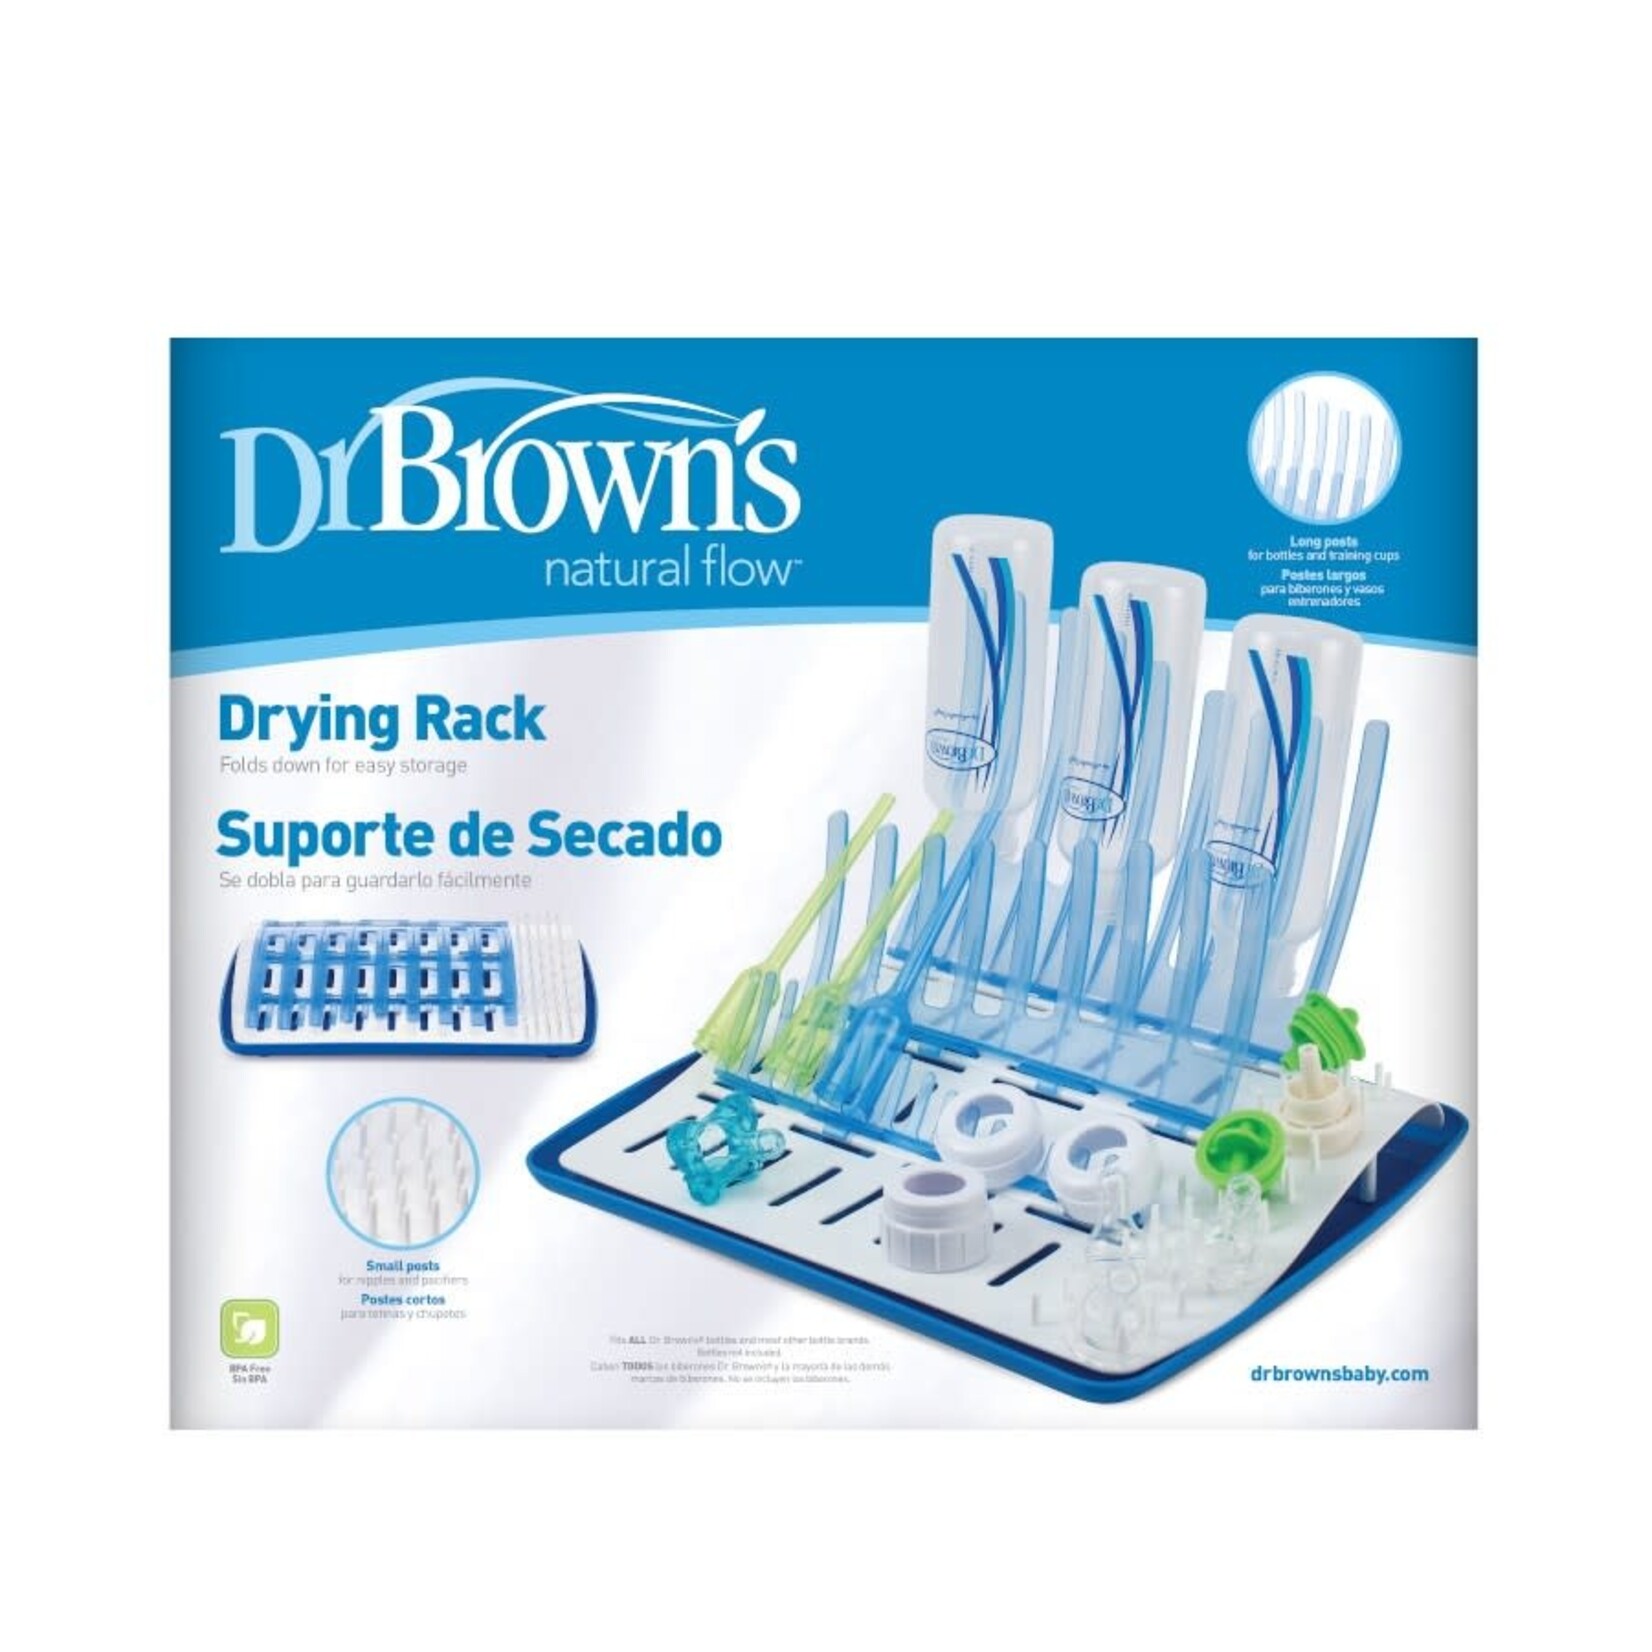 Dr Browns DR BROWNS FOLDING DRYING RACK